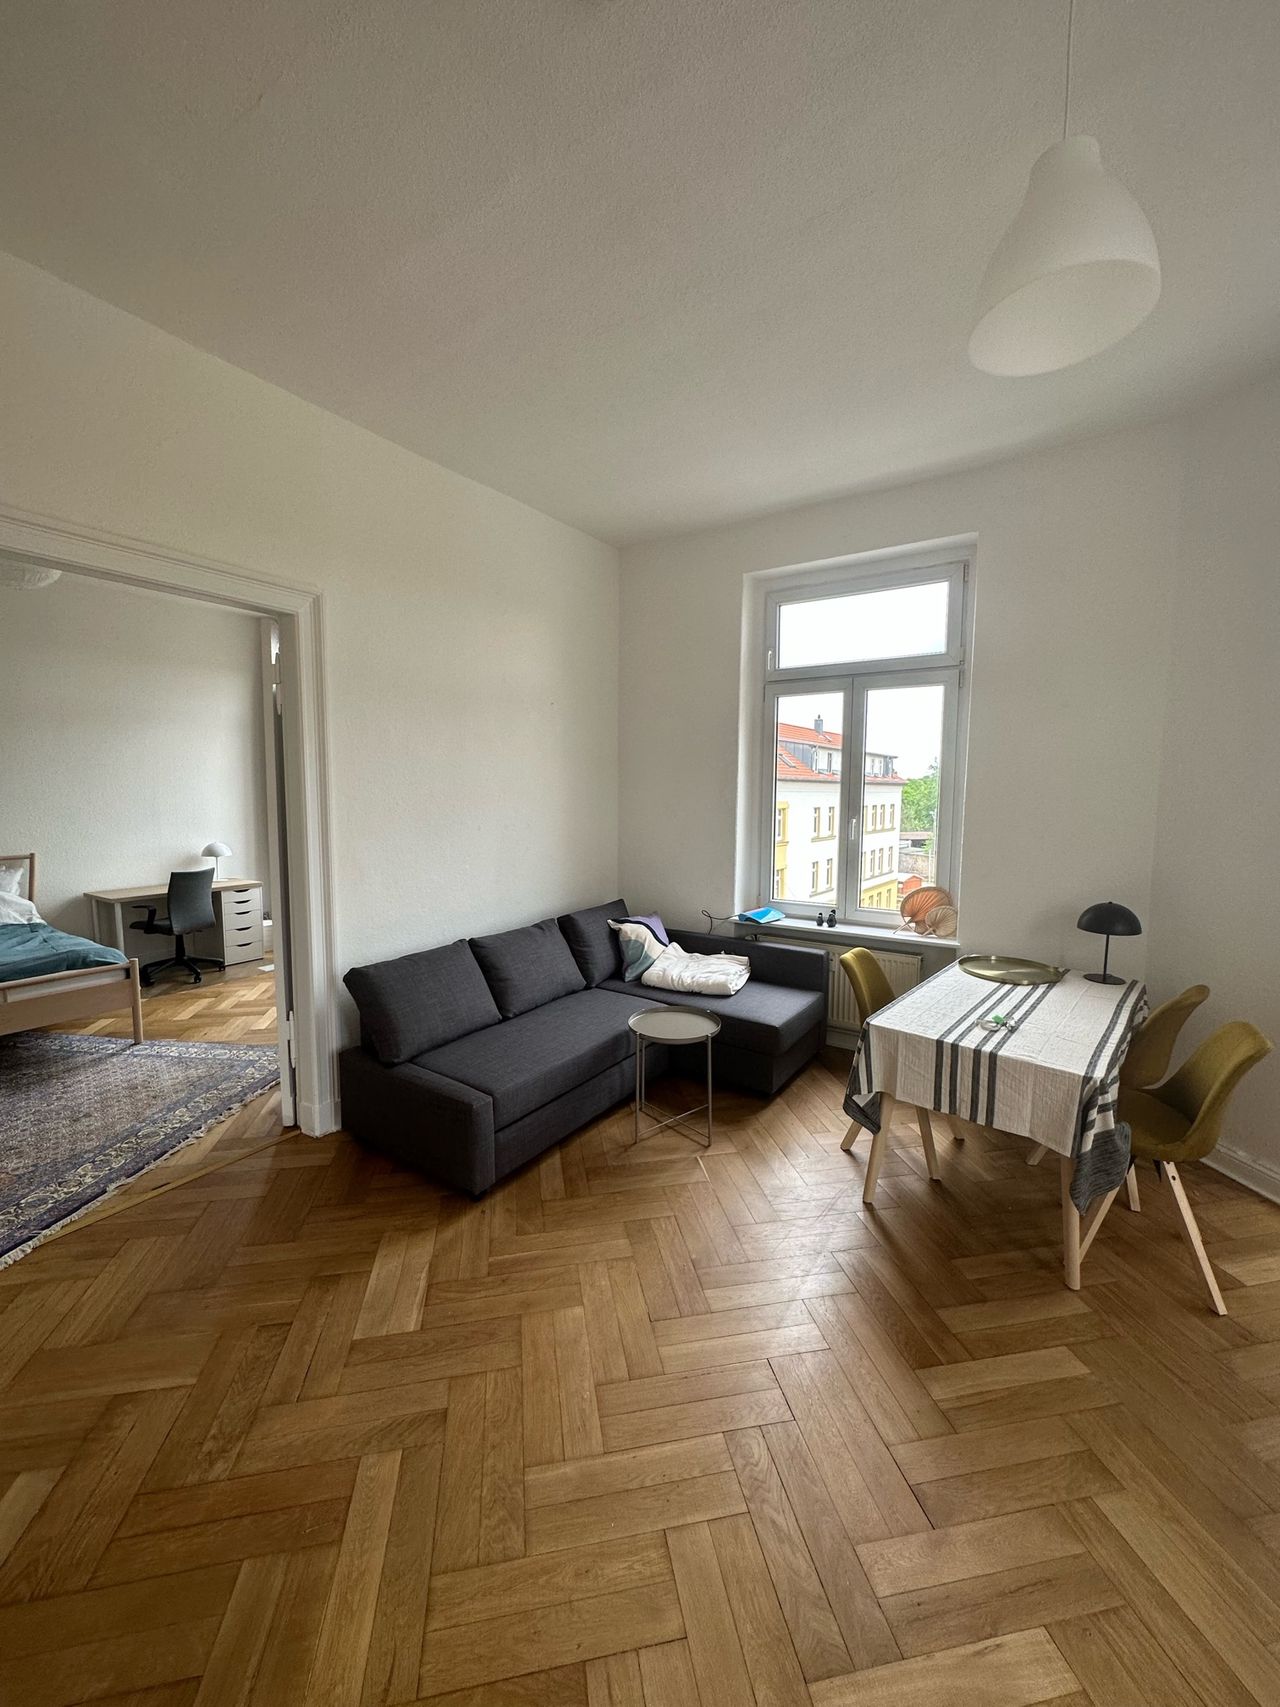 Sunny and spacious apartment in excellent location (Magdeburg)